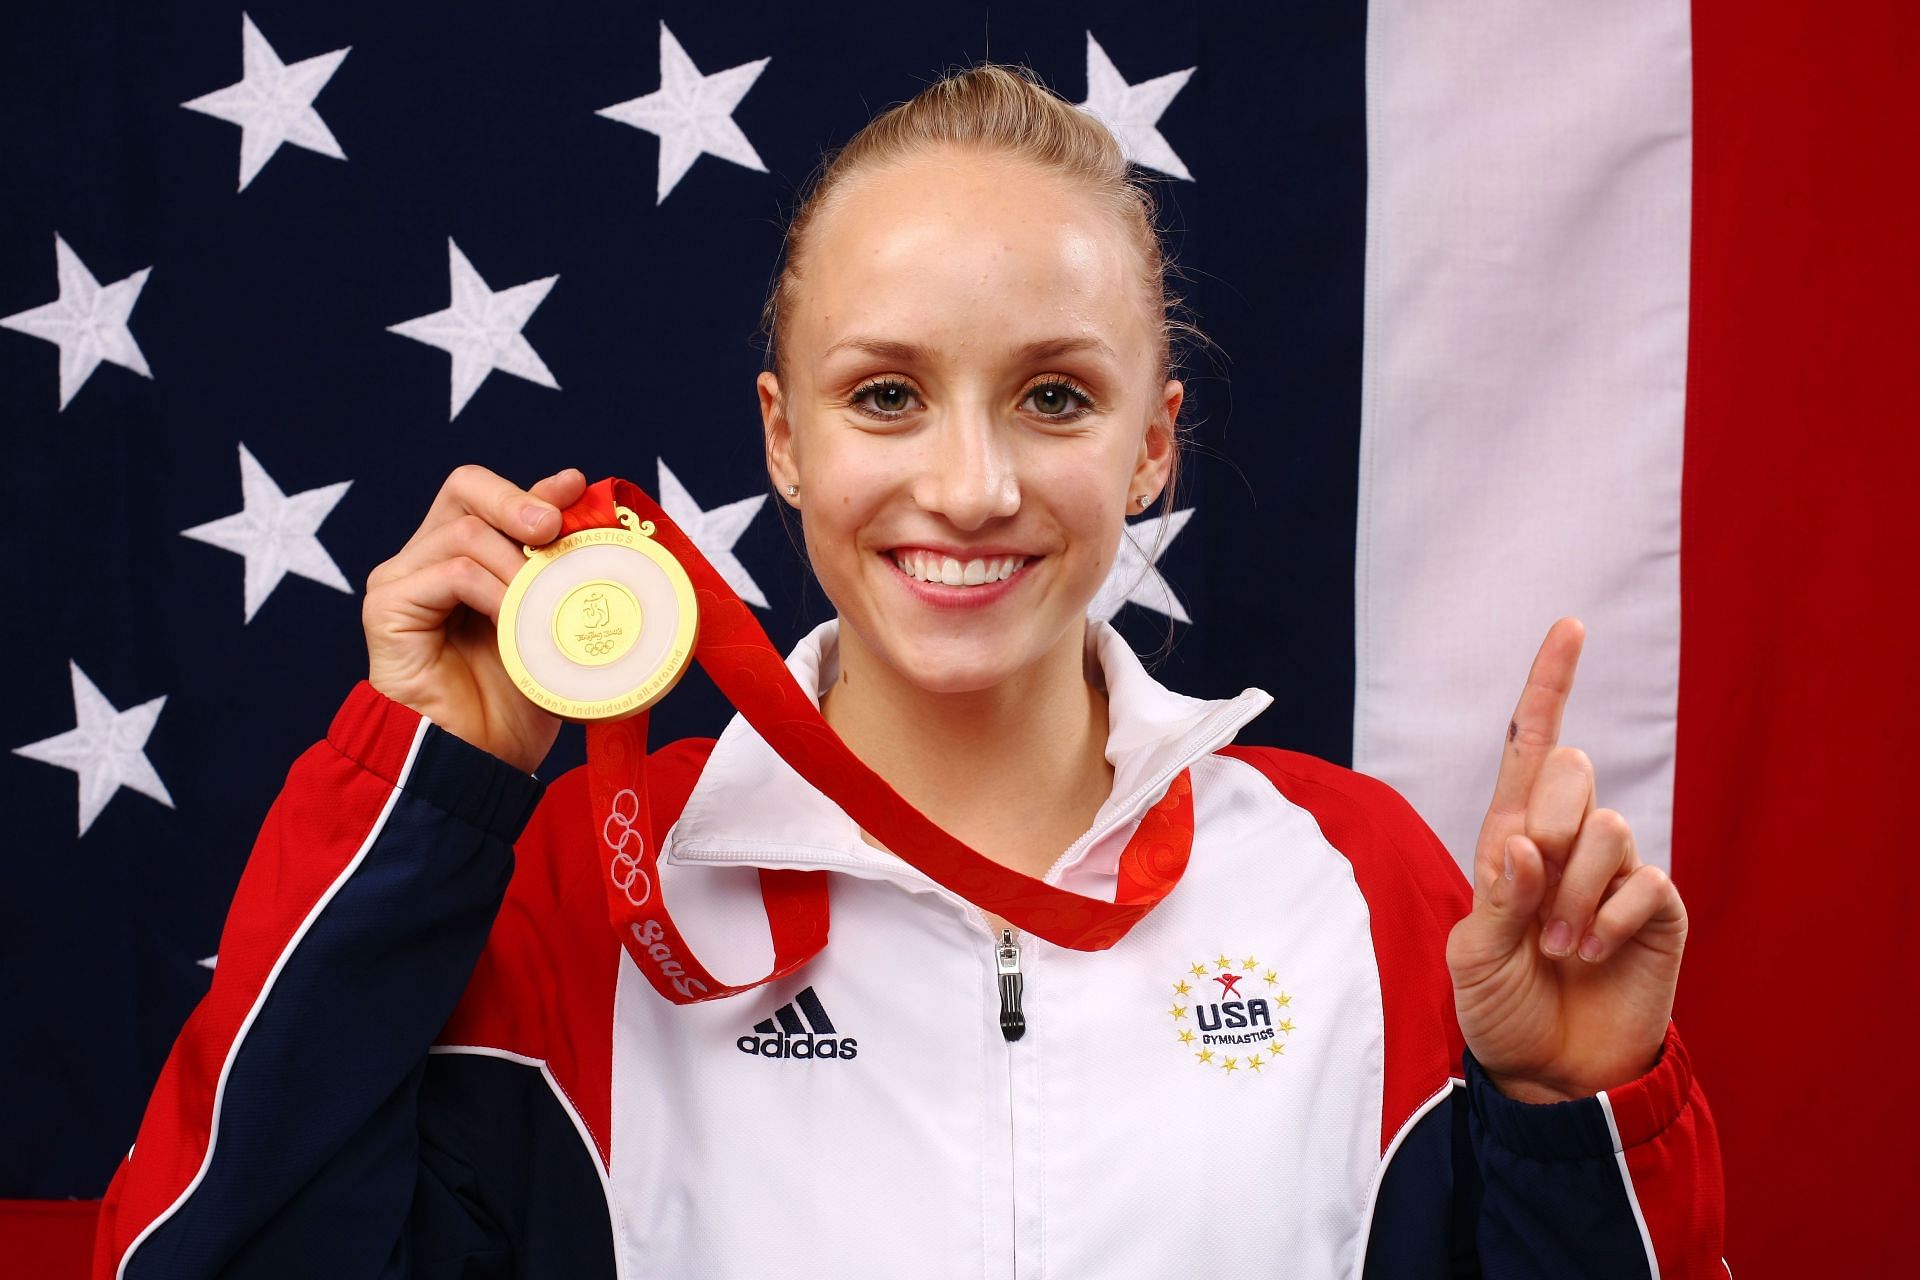 Liukin poses with her gold medal after winning the Women&#039;s all around Gymnastics event at the Beijing 2008 Olympic Games. (Photo by Kristian Dowling/Getty Images)